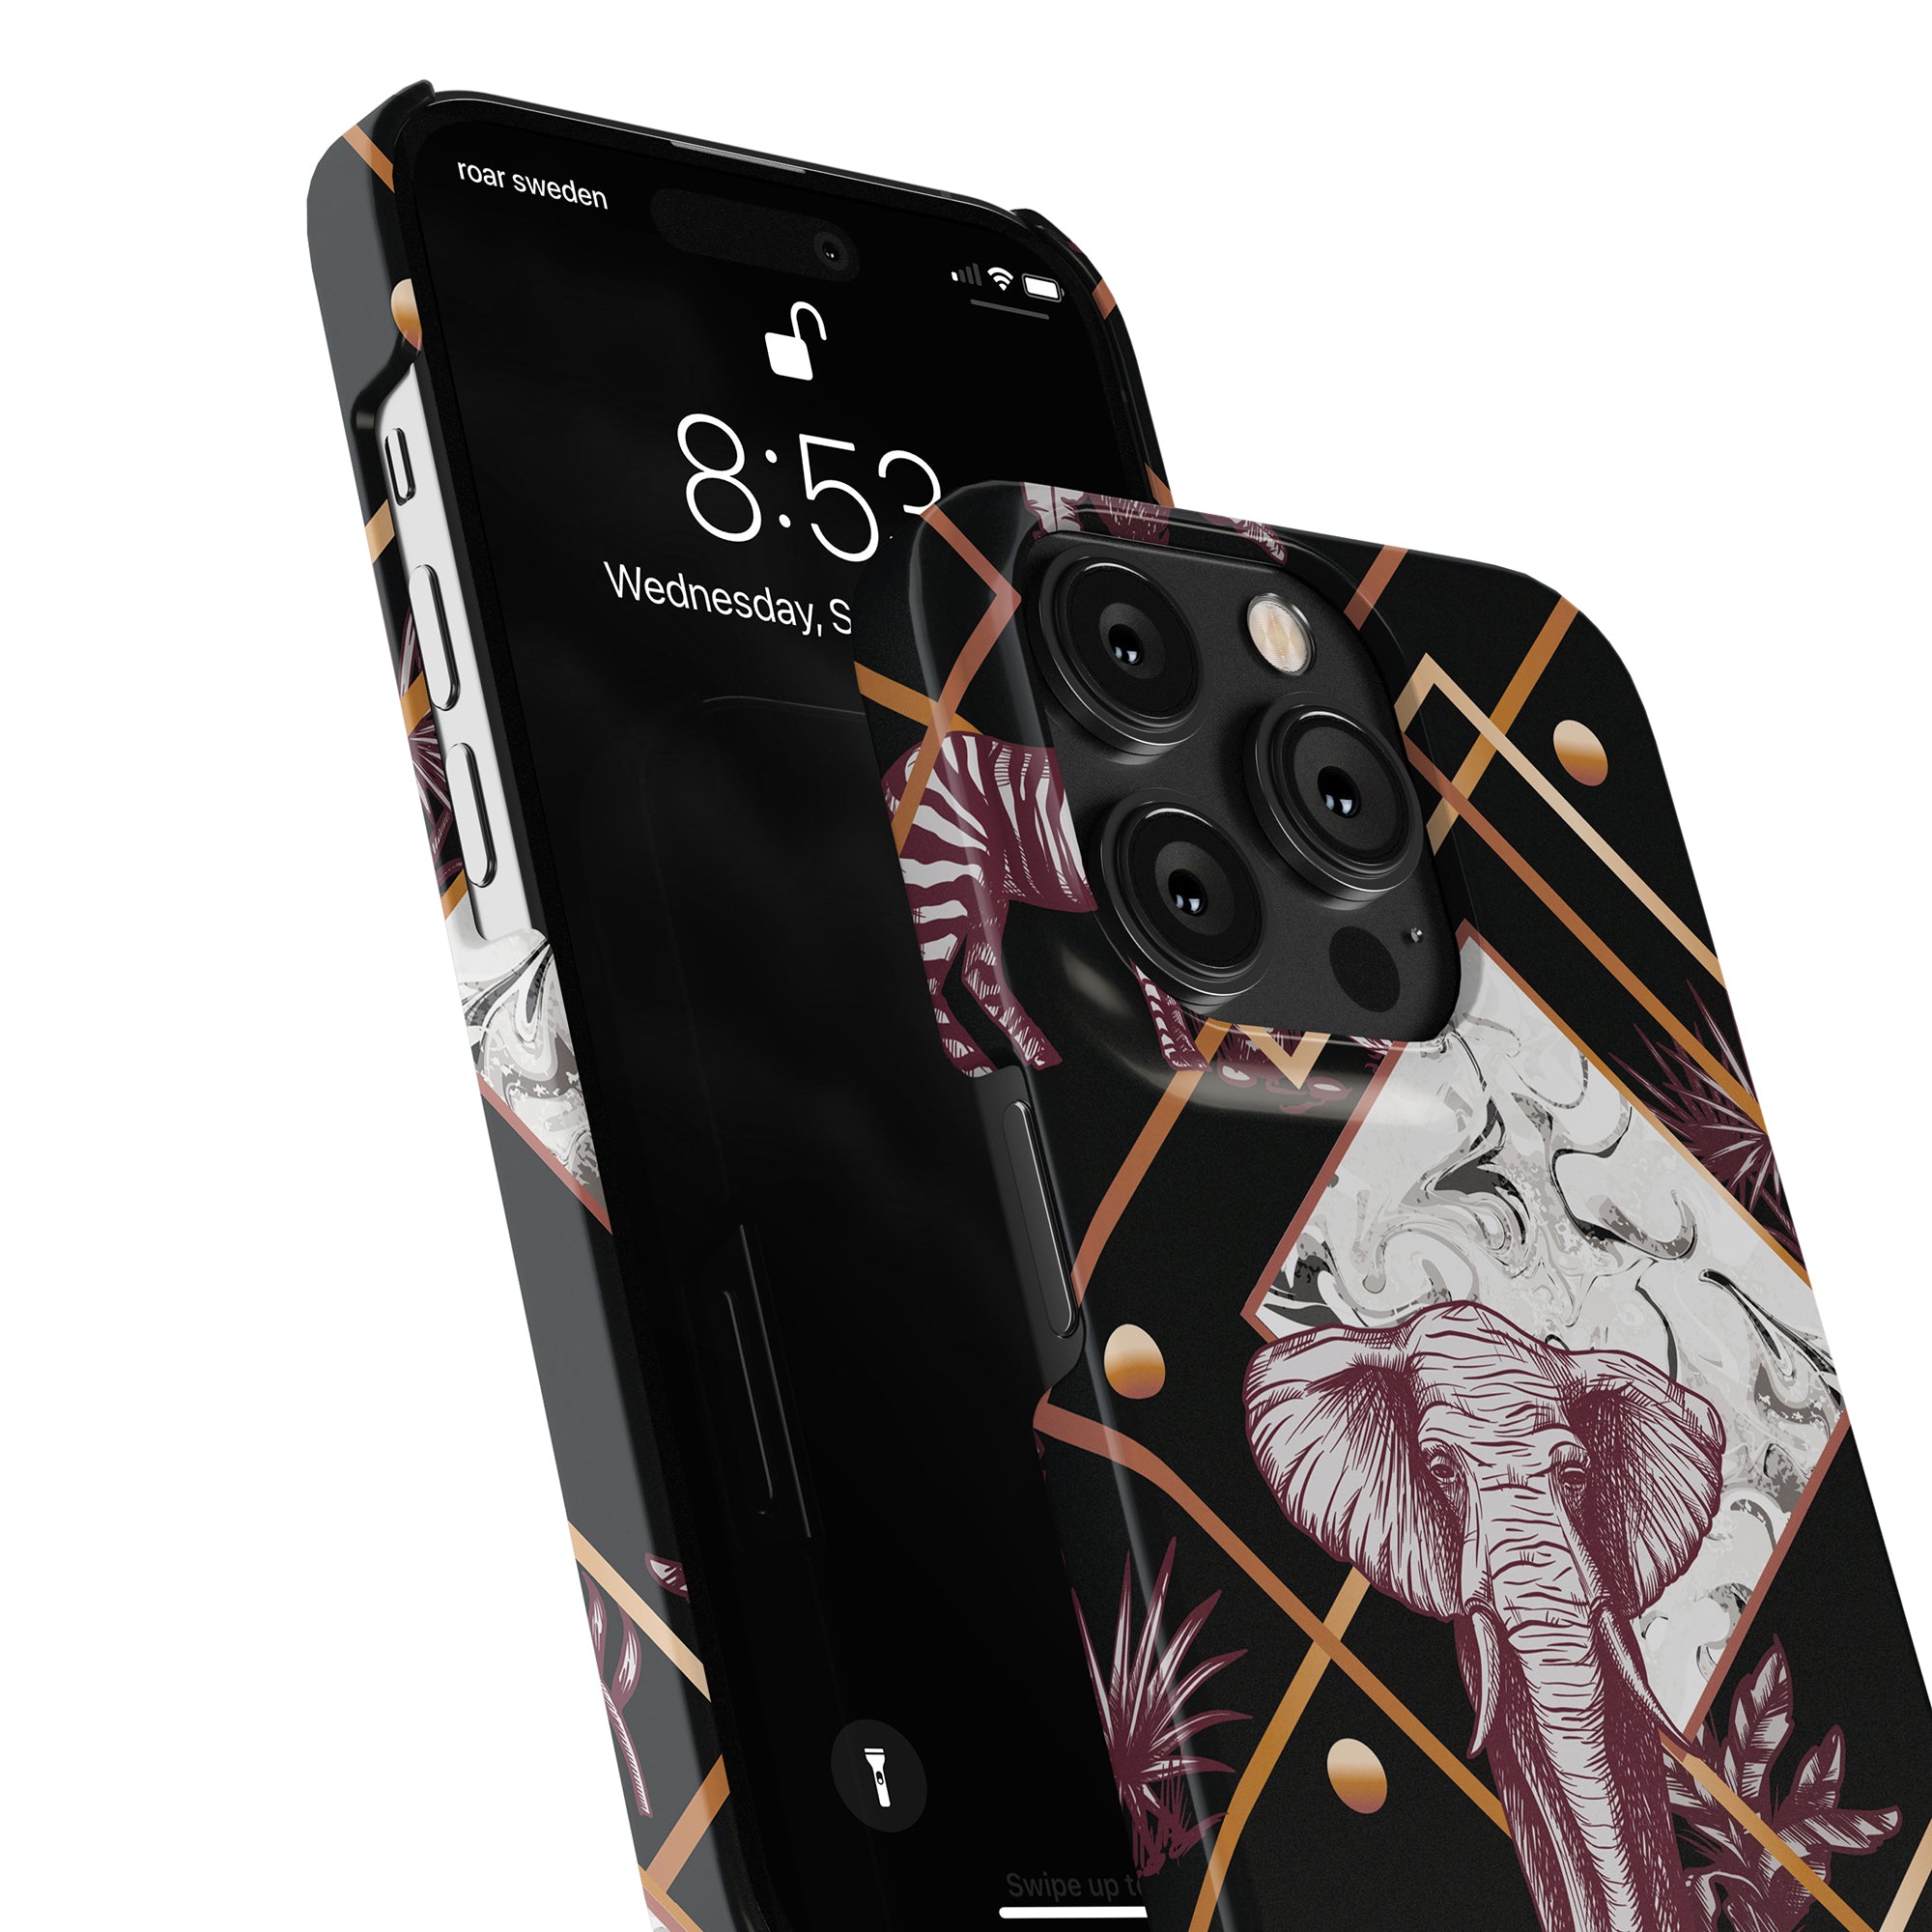 The Savanna - Slim case features a captivating elephant illustration, exclusively designed by Roar Sweden.